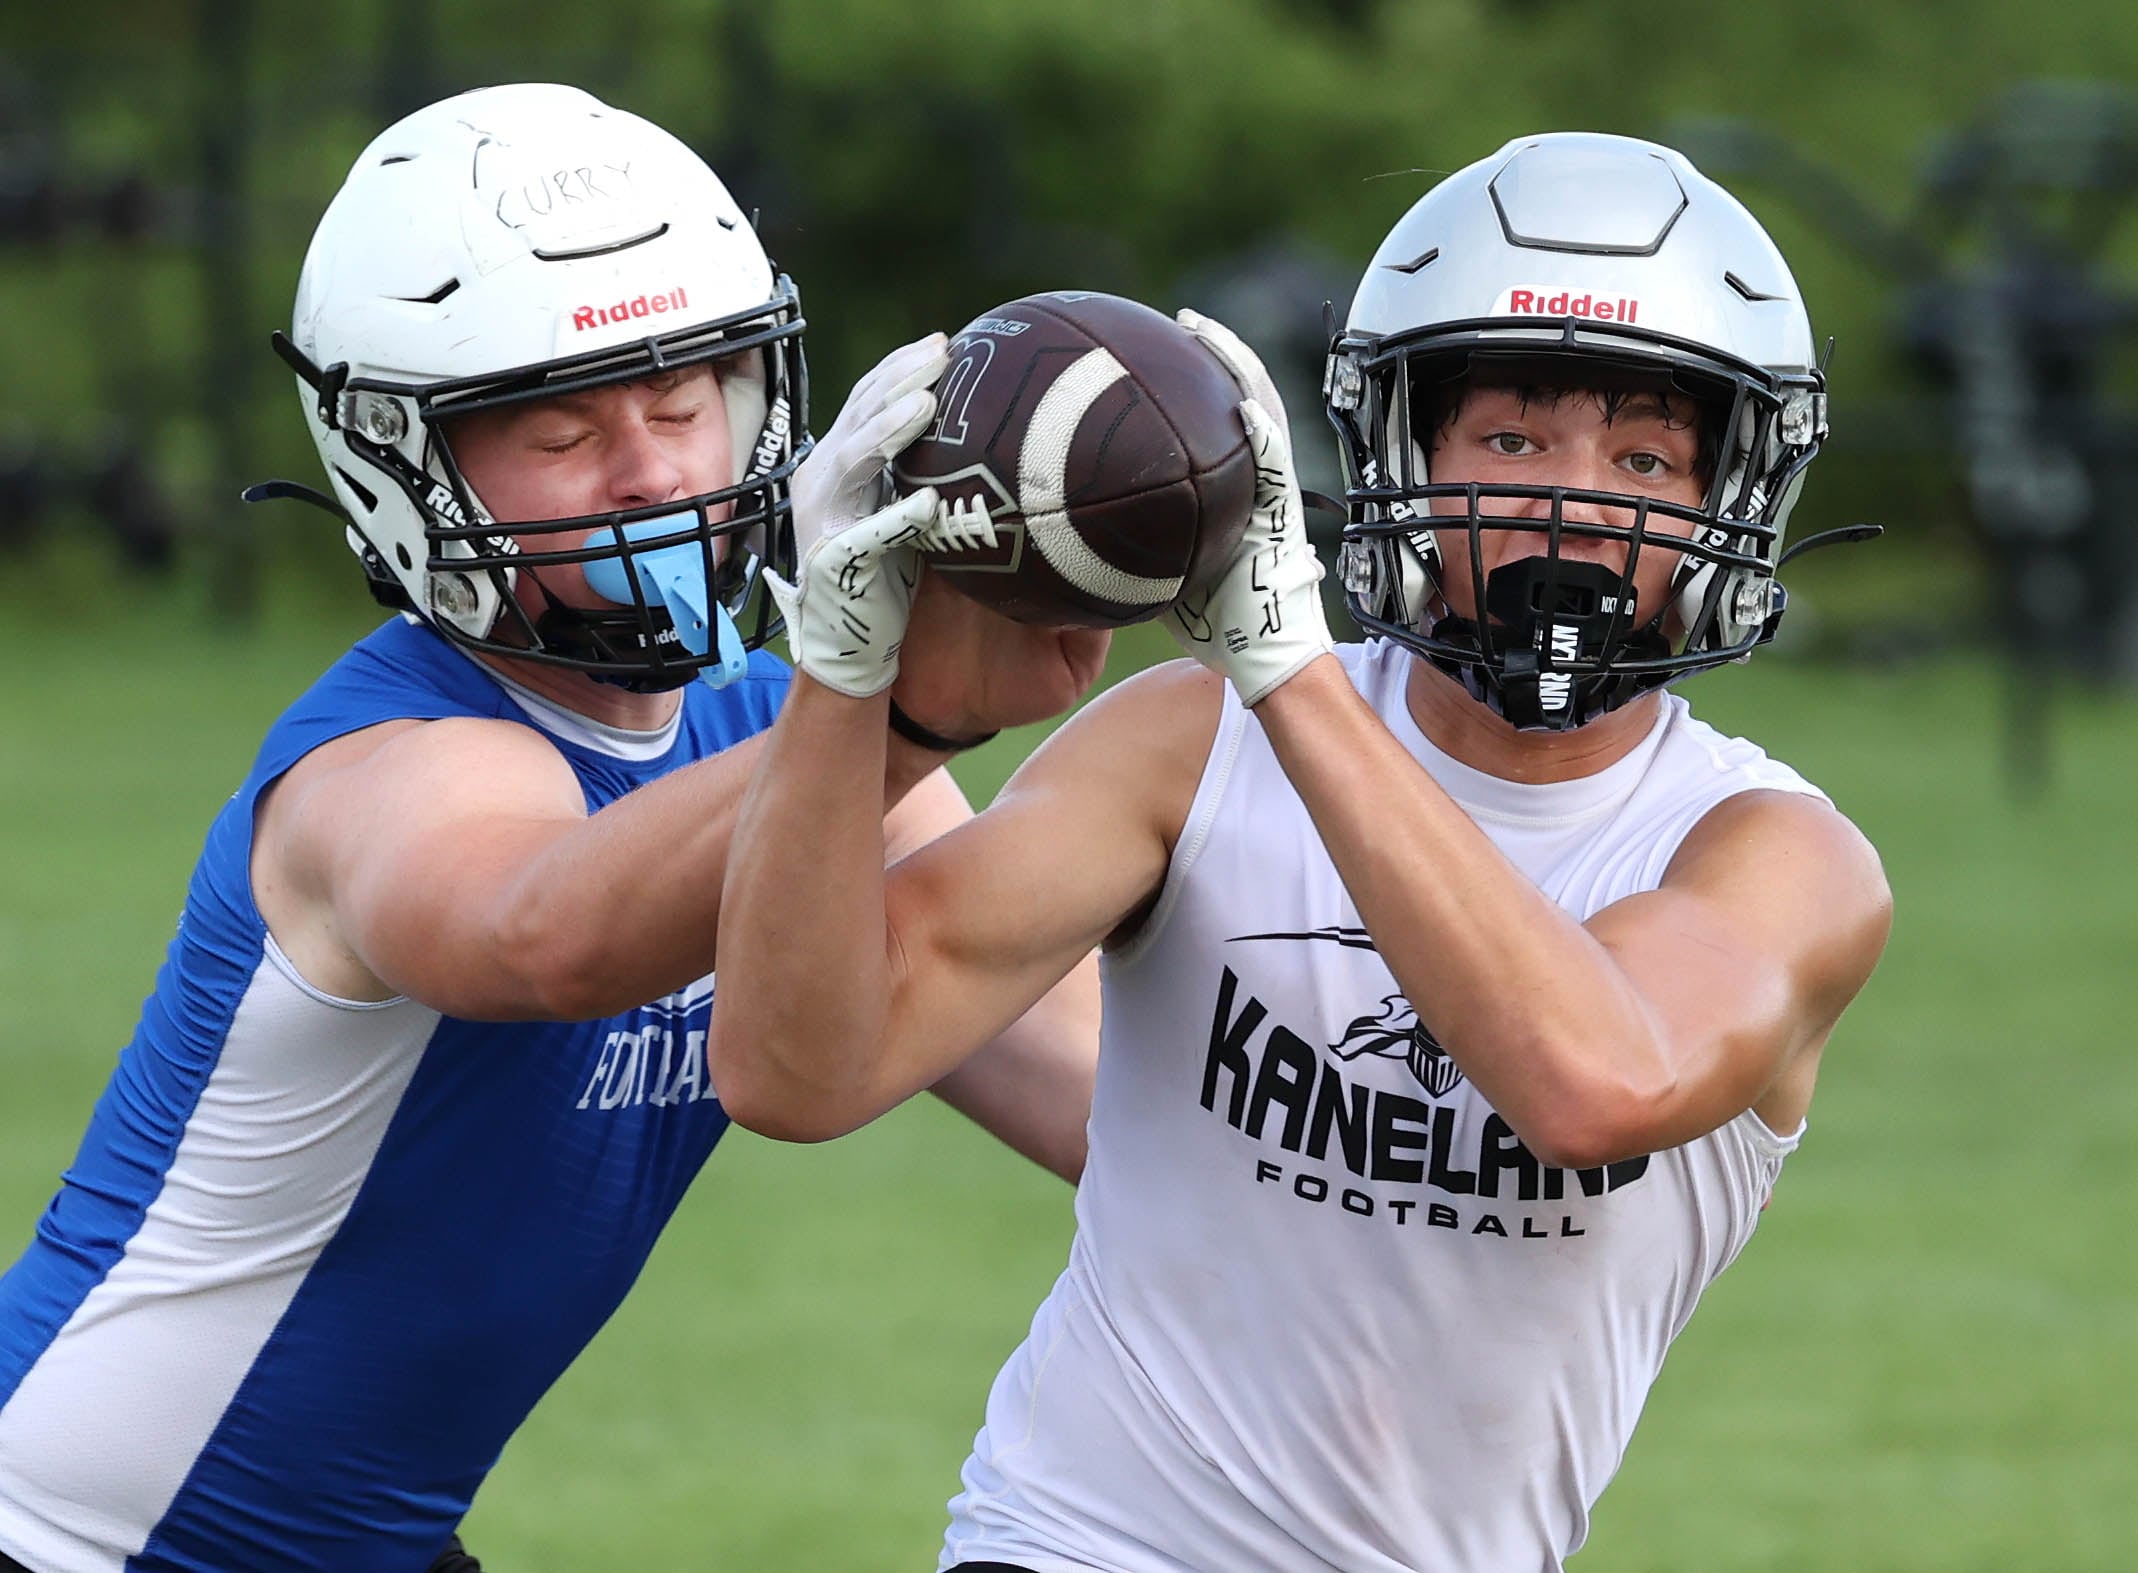 Dylan Sanagustin poised to be big offensive threat for Kaneland